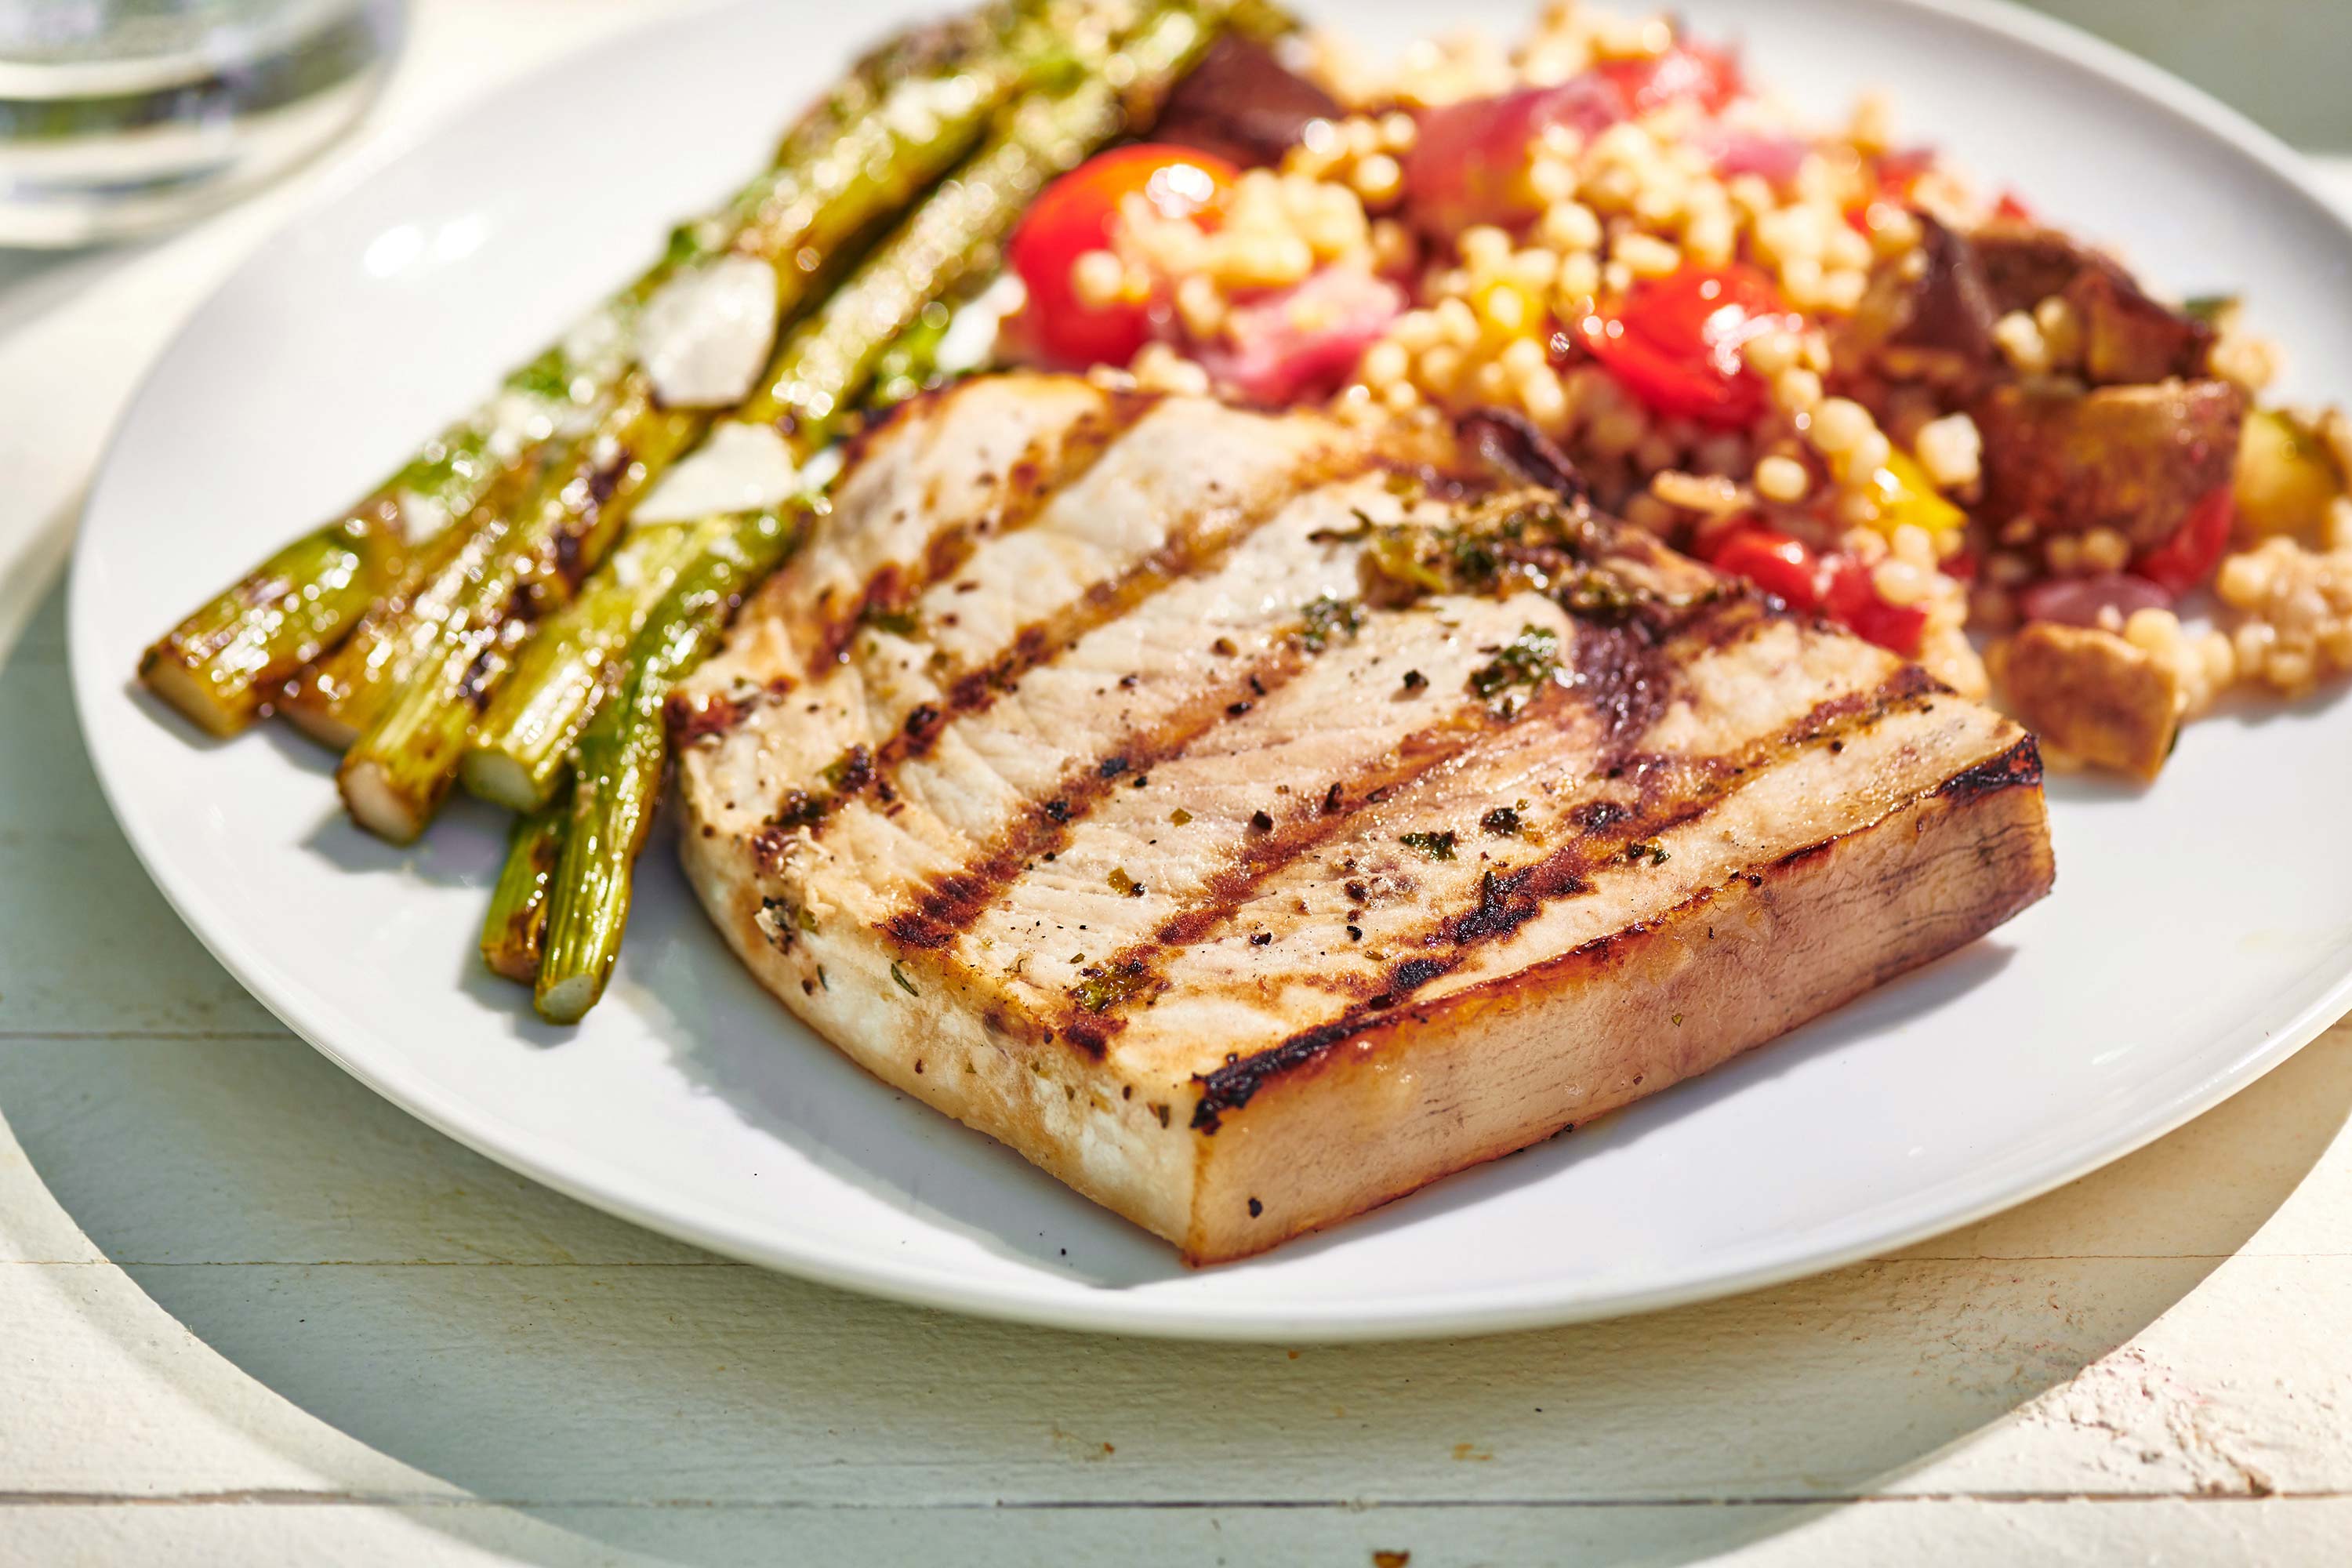 Grilled Swordfish with asparagus and couscous salad on a white plate.